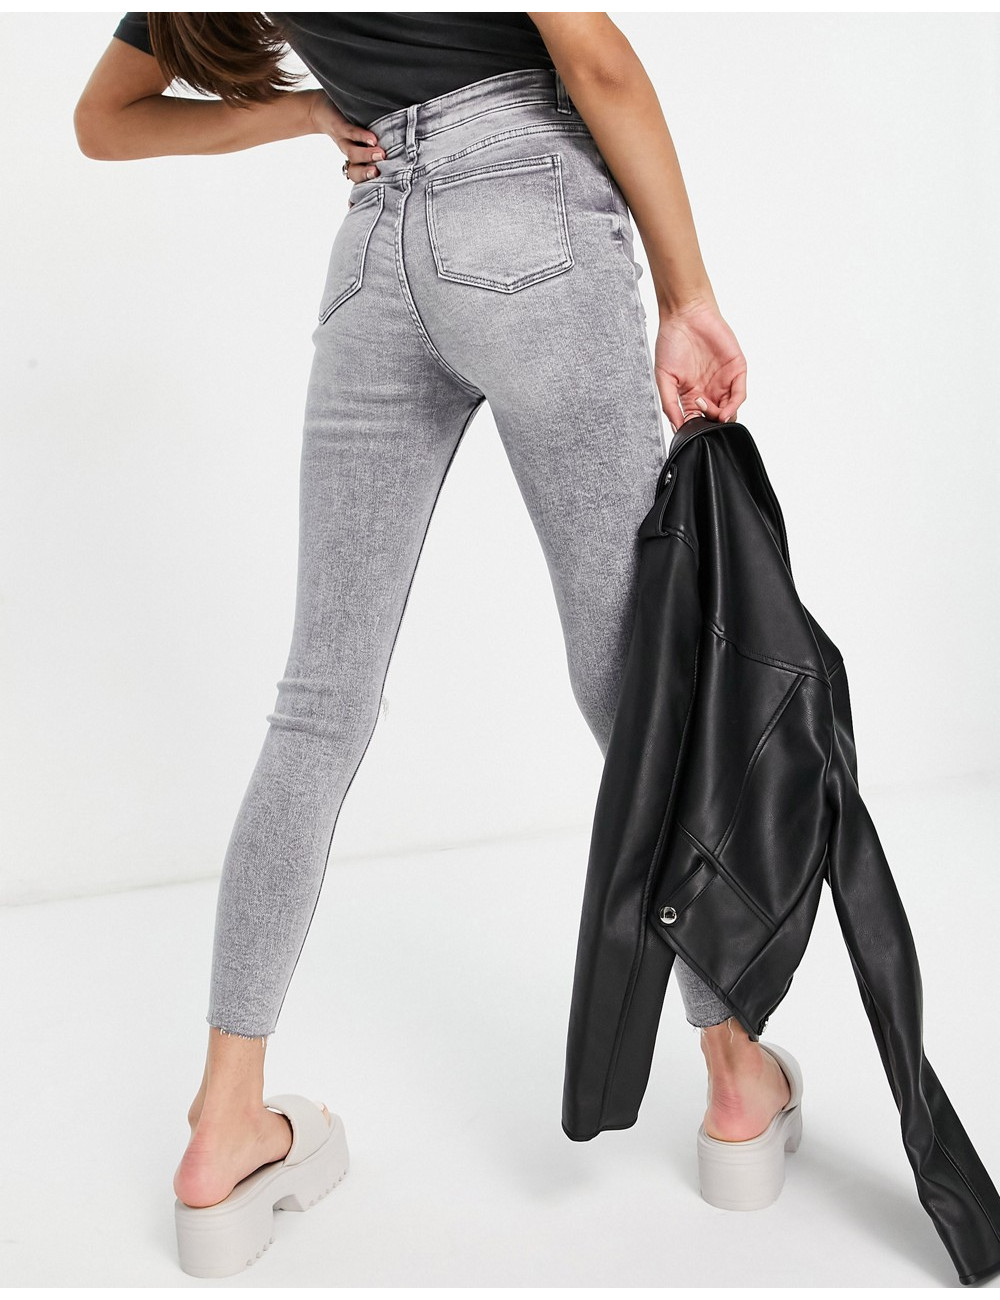 New Look ripped disco jean...